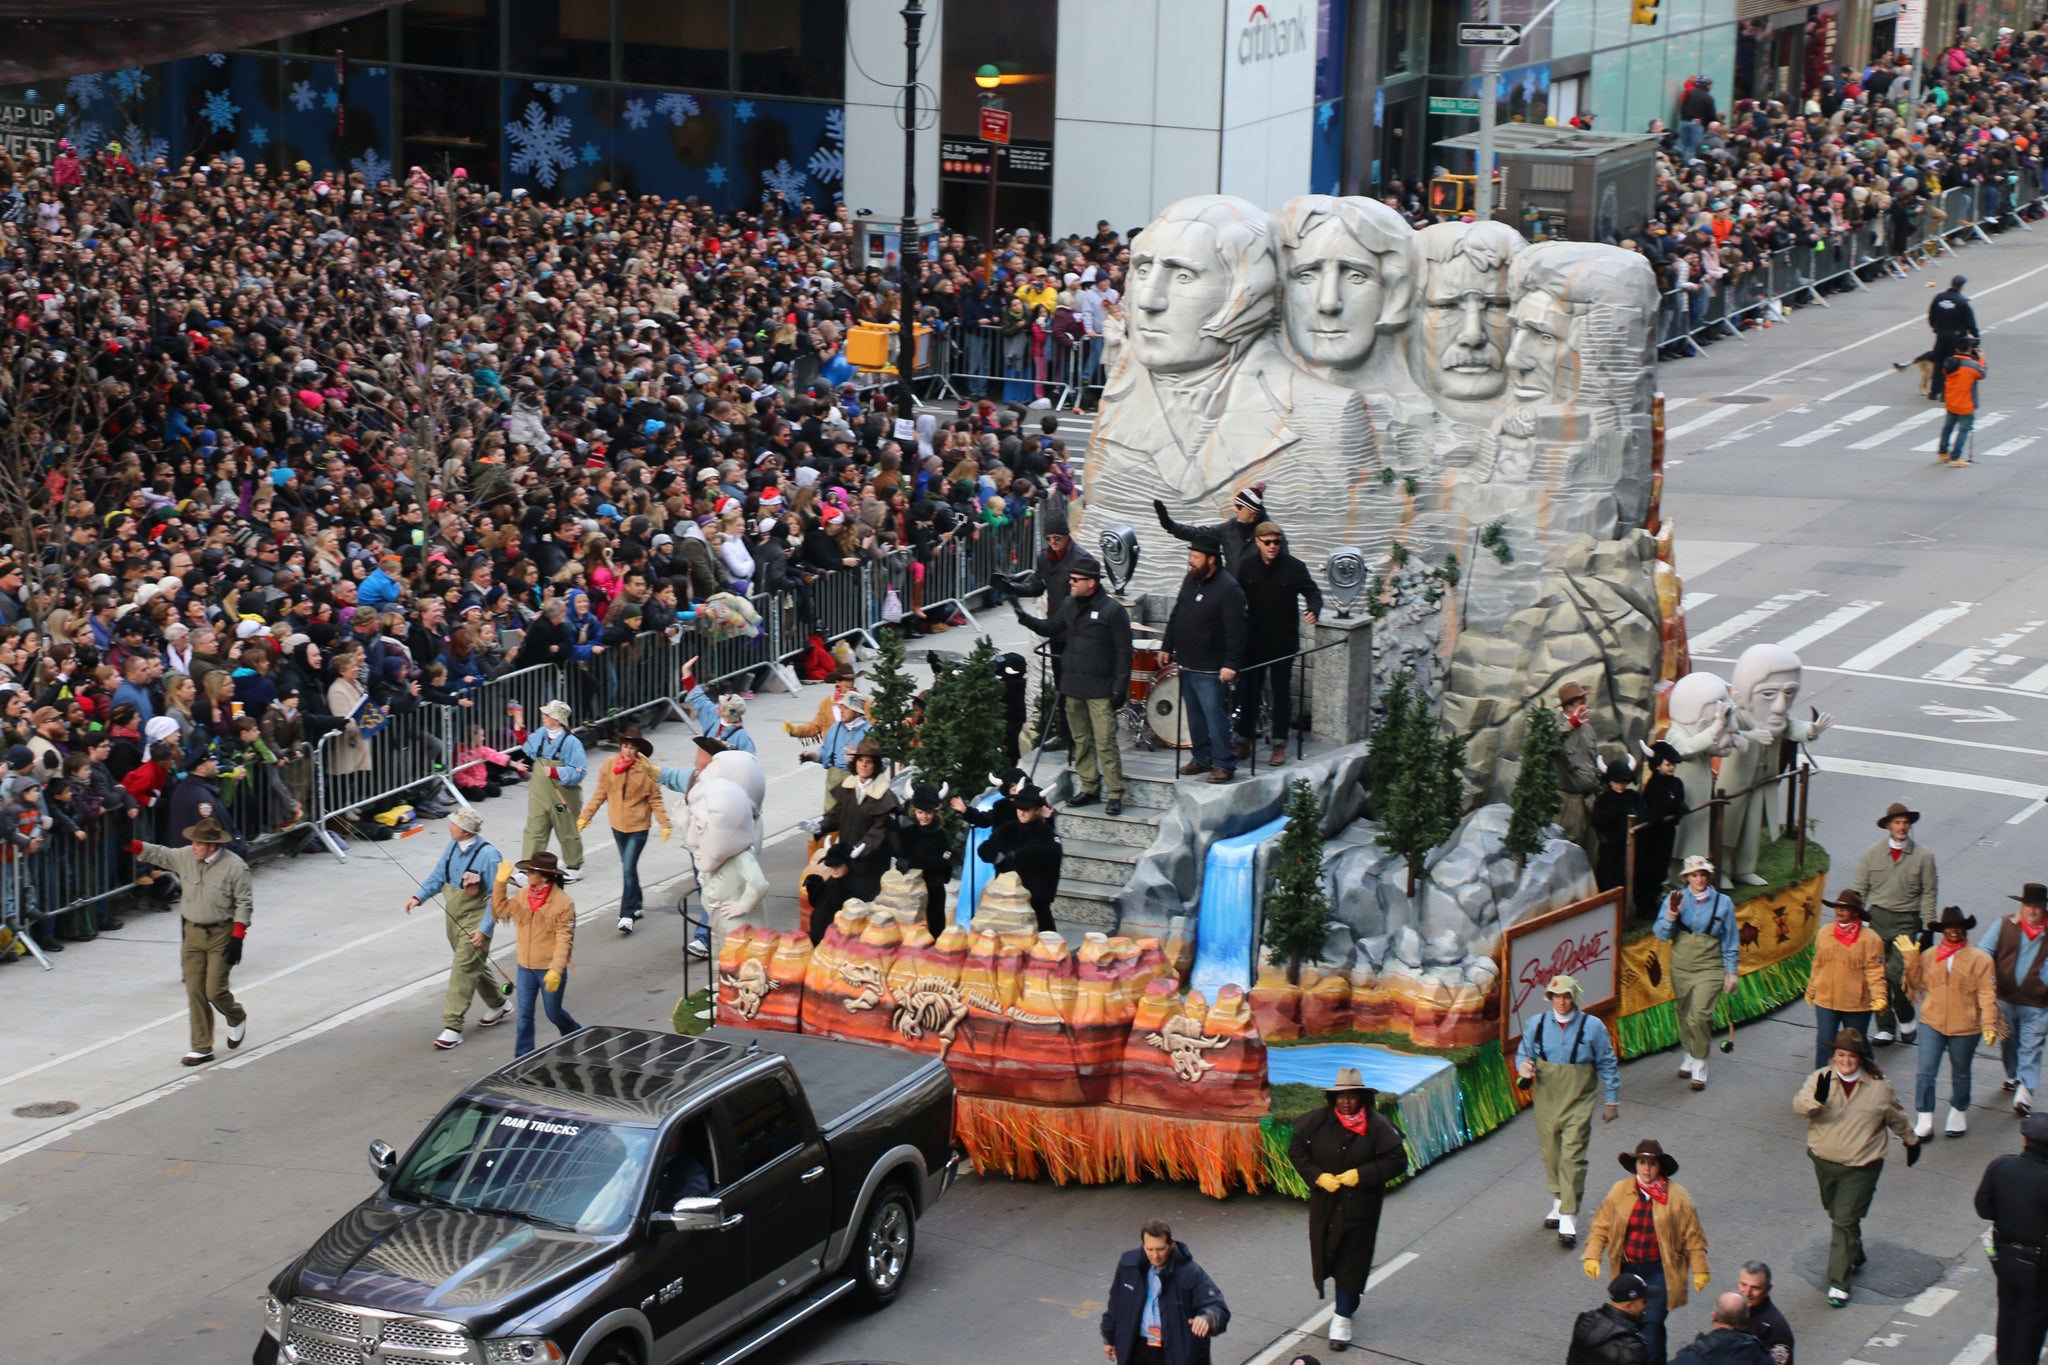 Last year's Macy's Thanksgiving Day Parade in New York